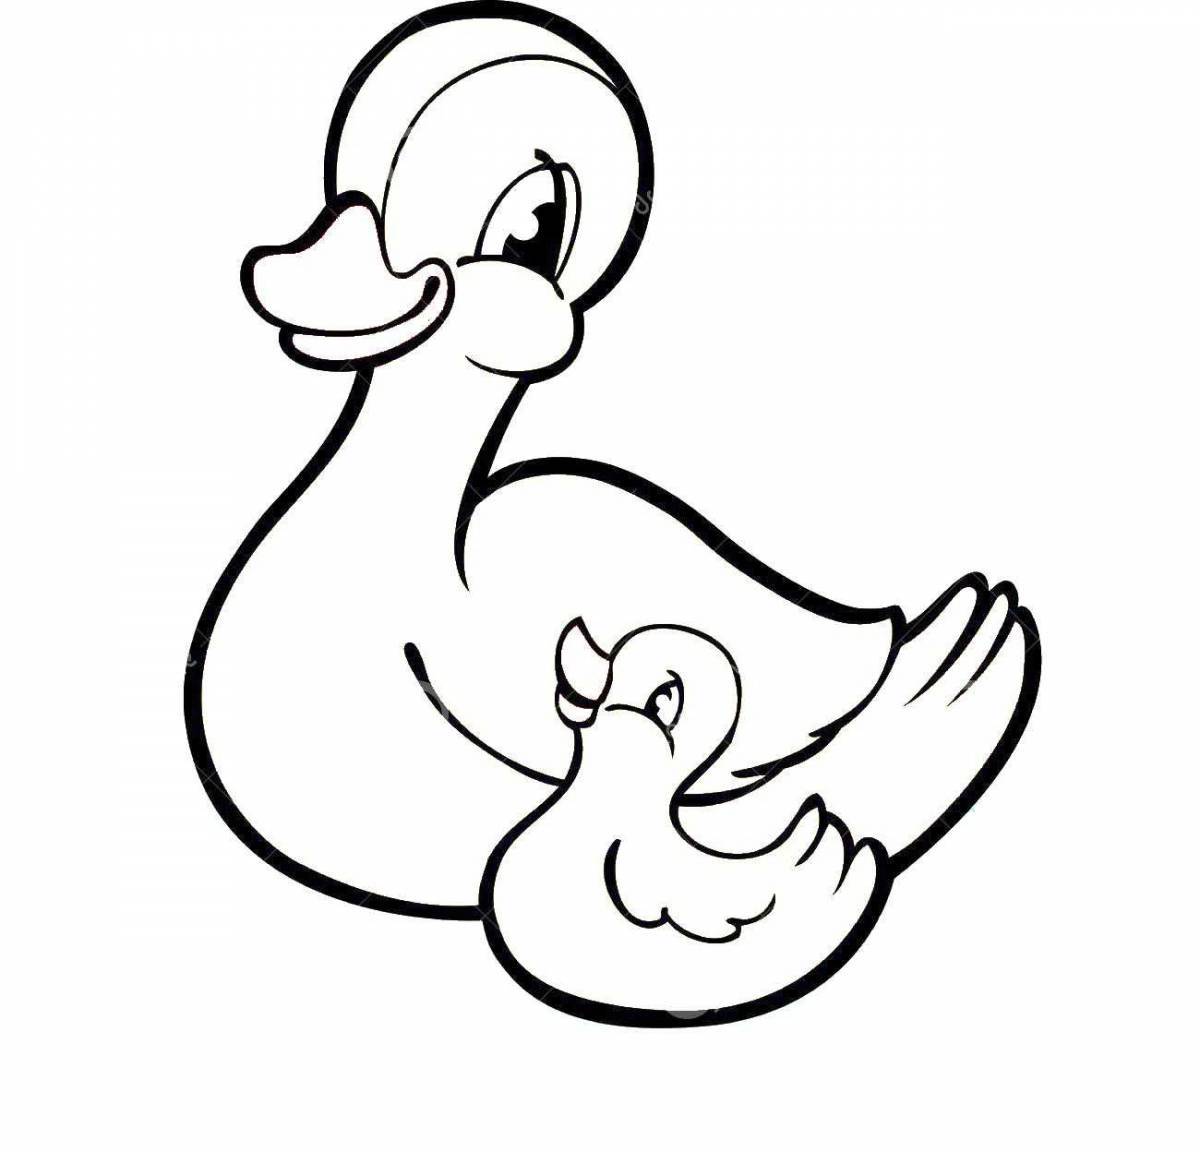 Adorable duck coloring for kids